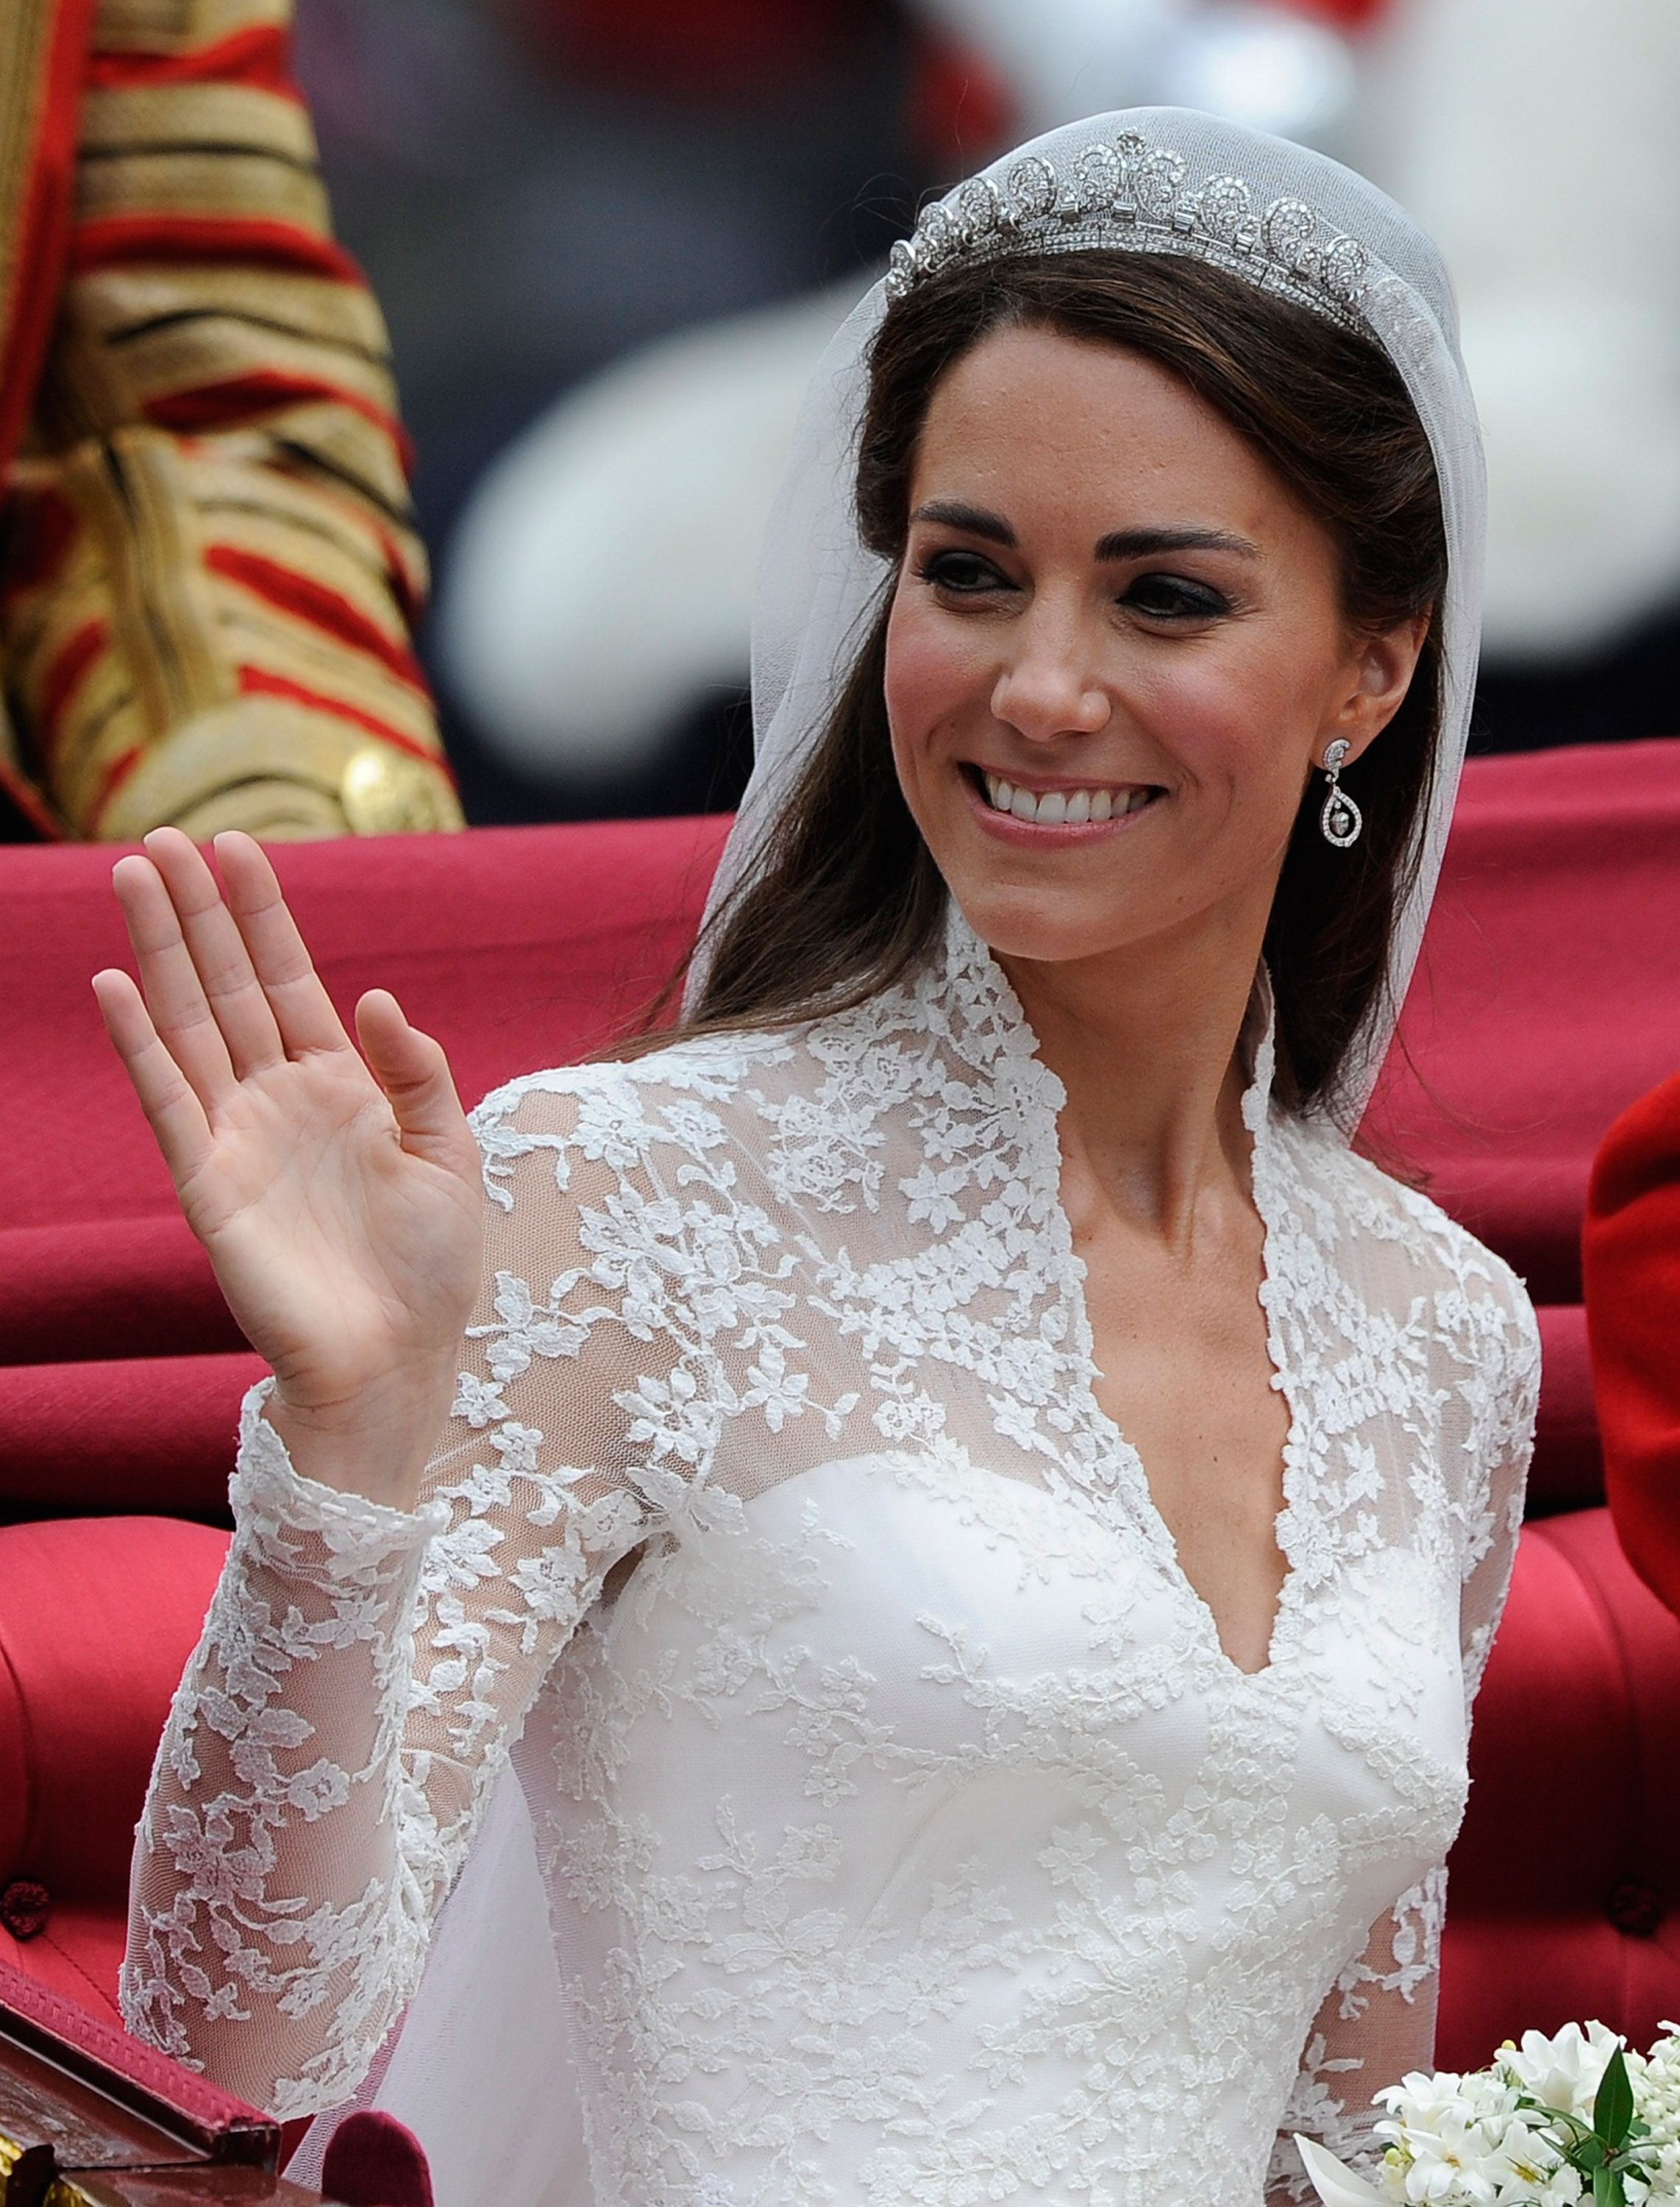 Kate Middleton Ignored Royal Hair Request on Wedding Day - Kate Middleton  Broke Royal Hair Rule on Wedding Day